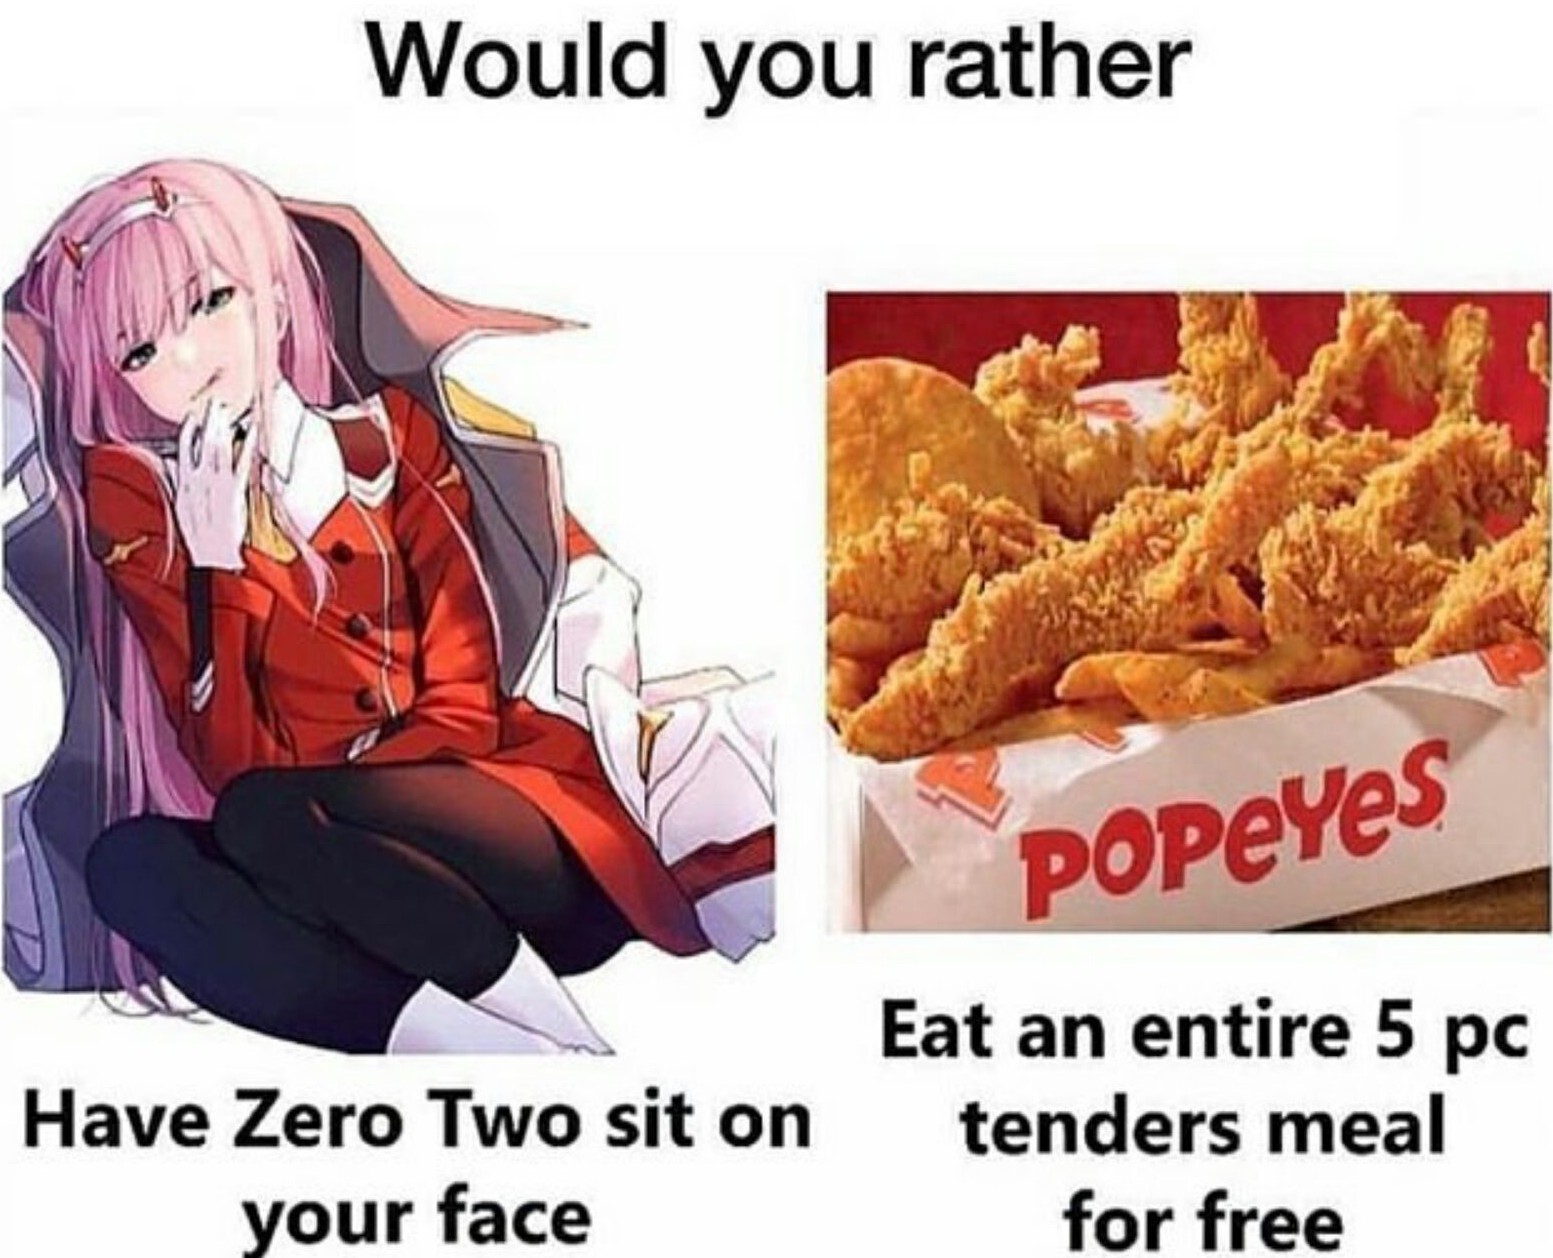 Zero Two is bangin but Popeye's is life - meme